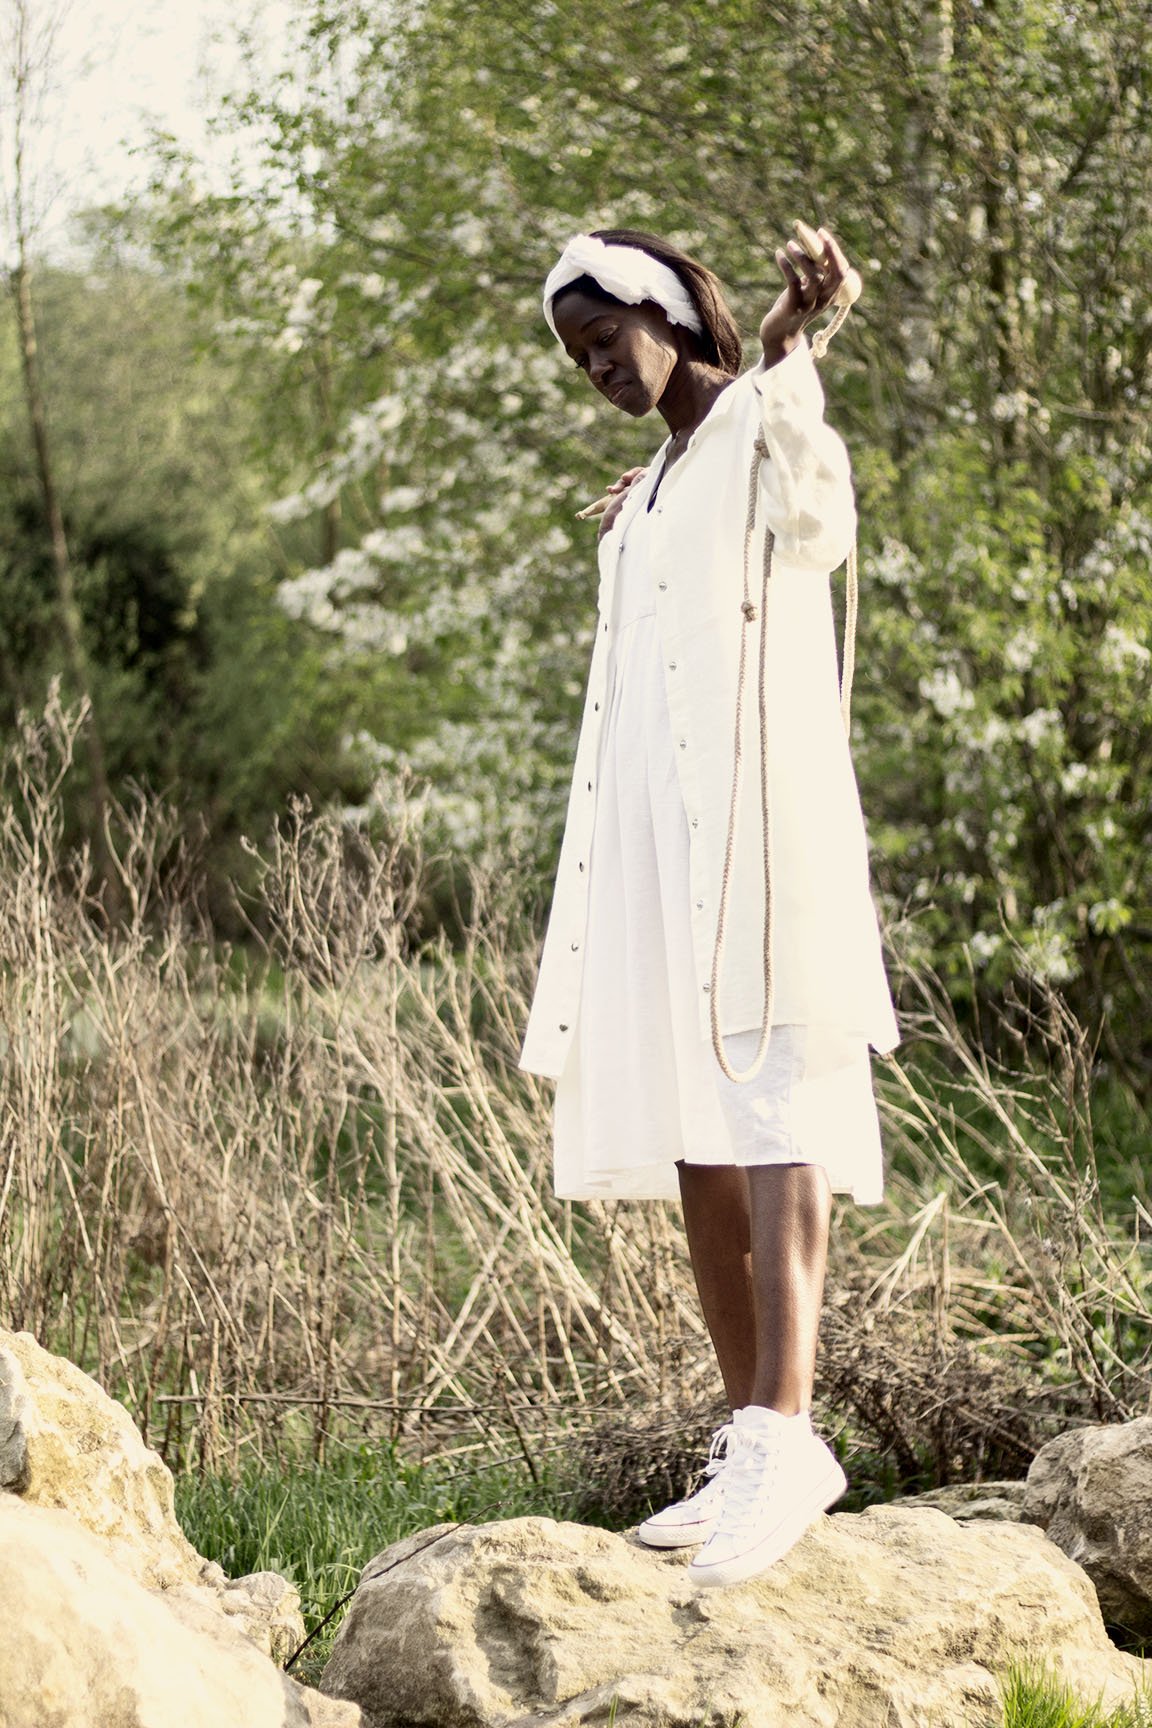 Apron dress in white made from 100% linen